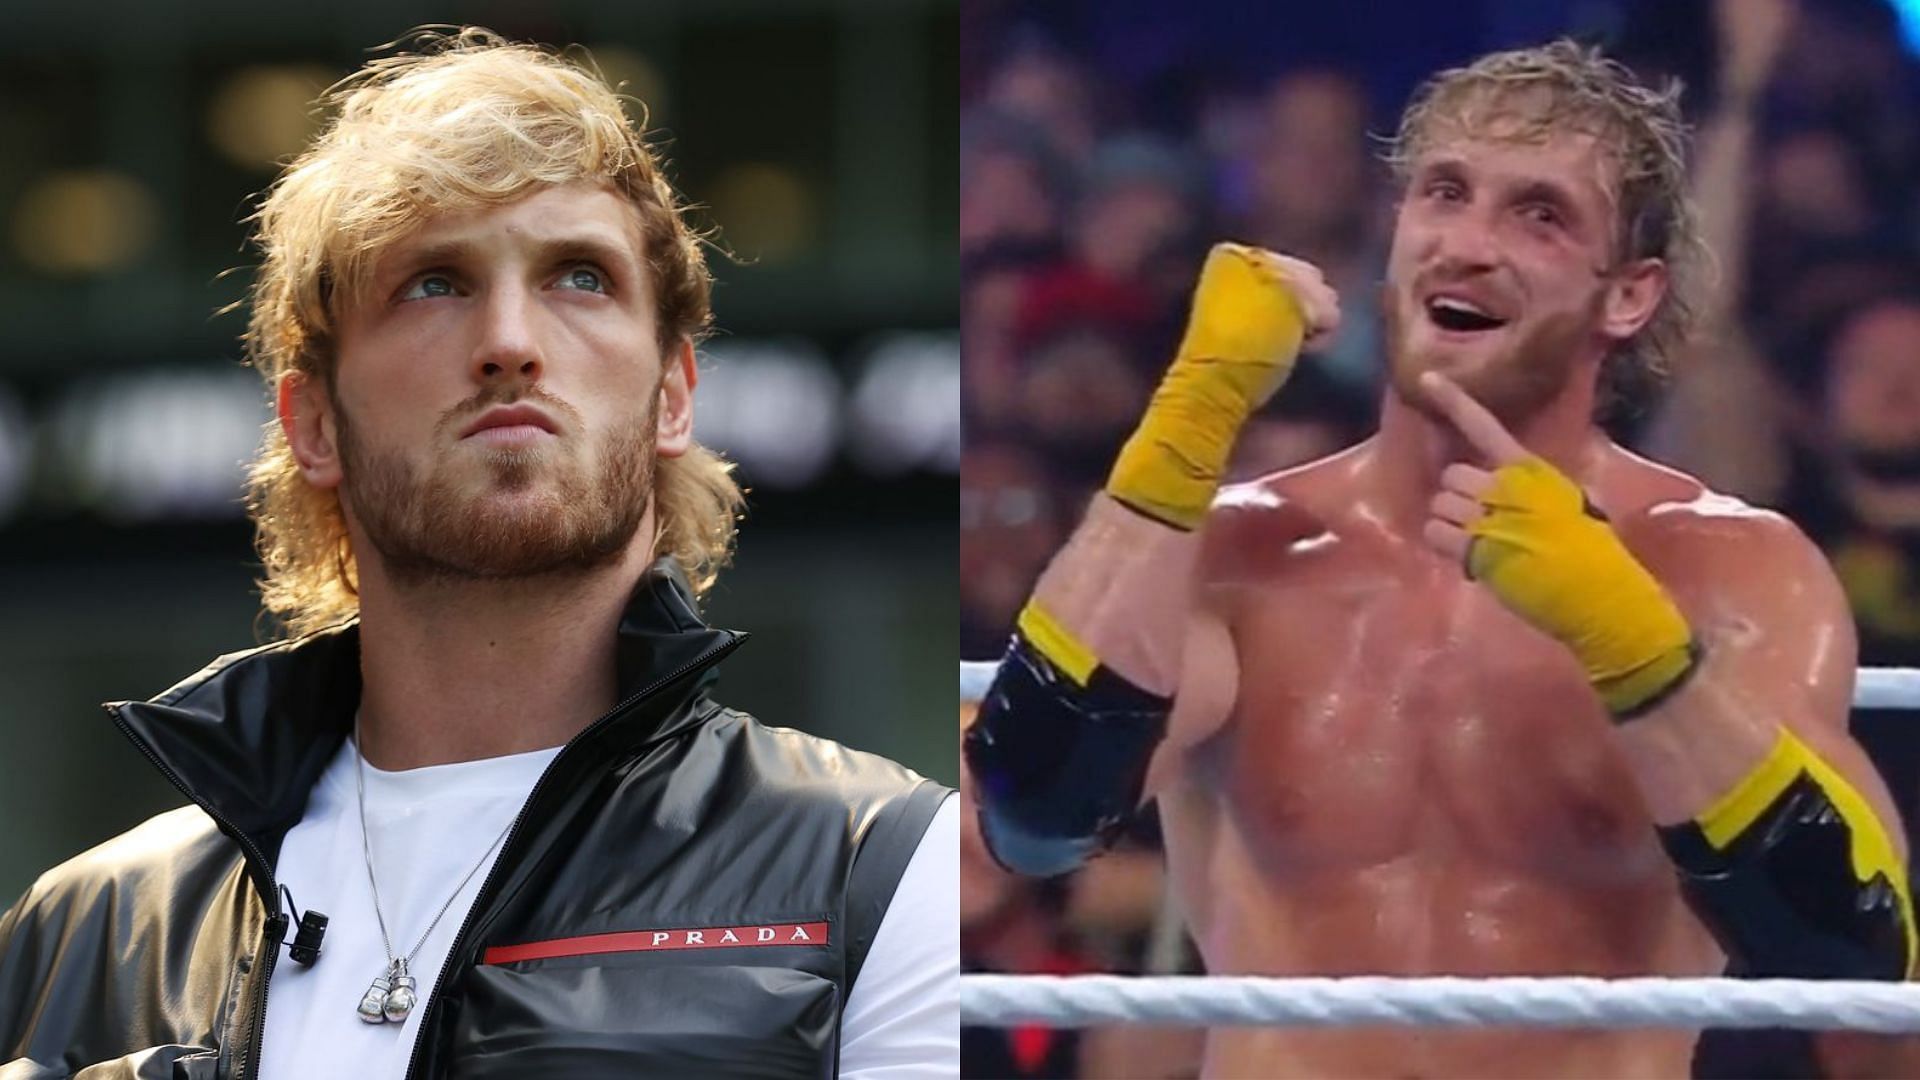 Logan Paul was in action tonight at SummerSlam.